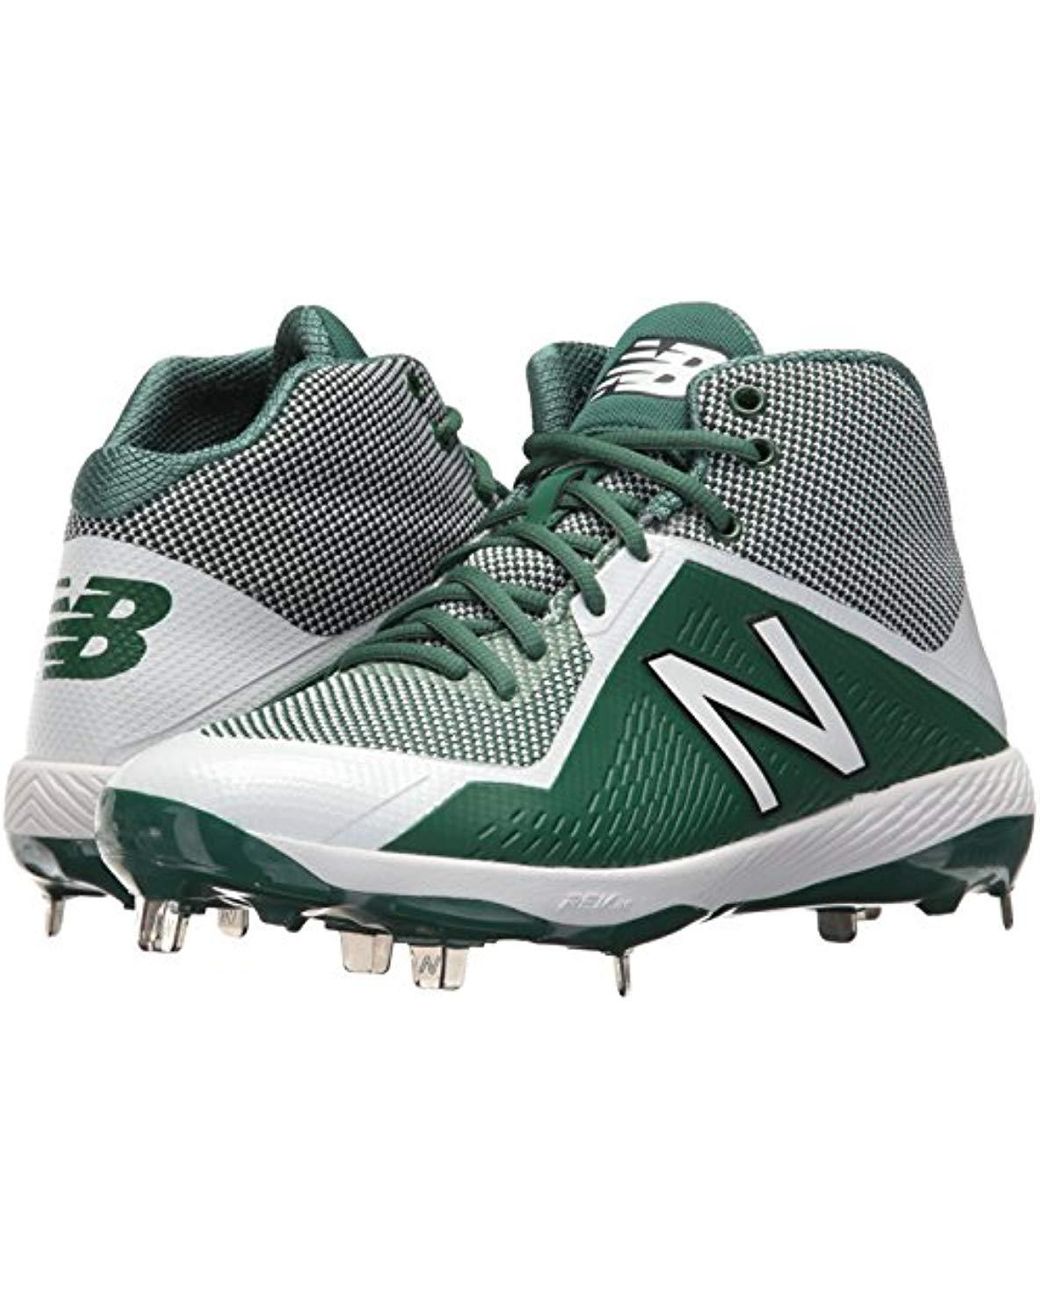 youth football cleats eastbay